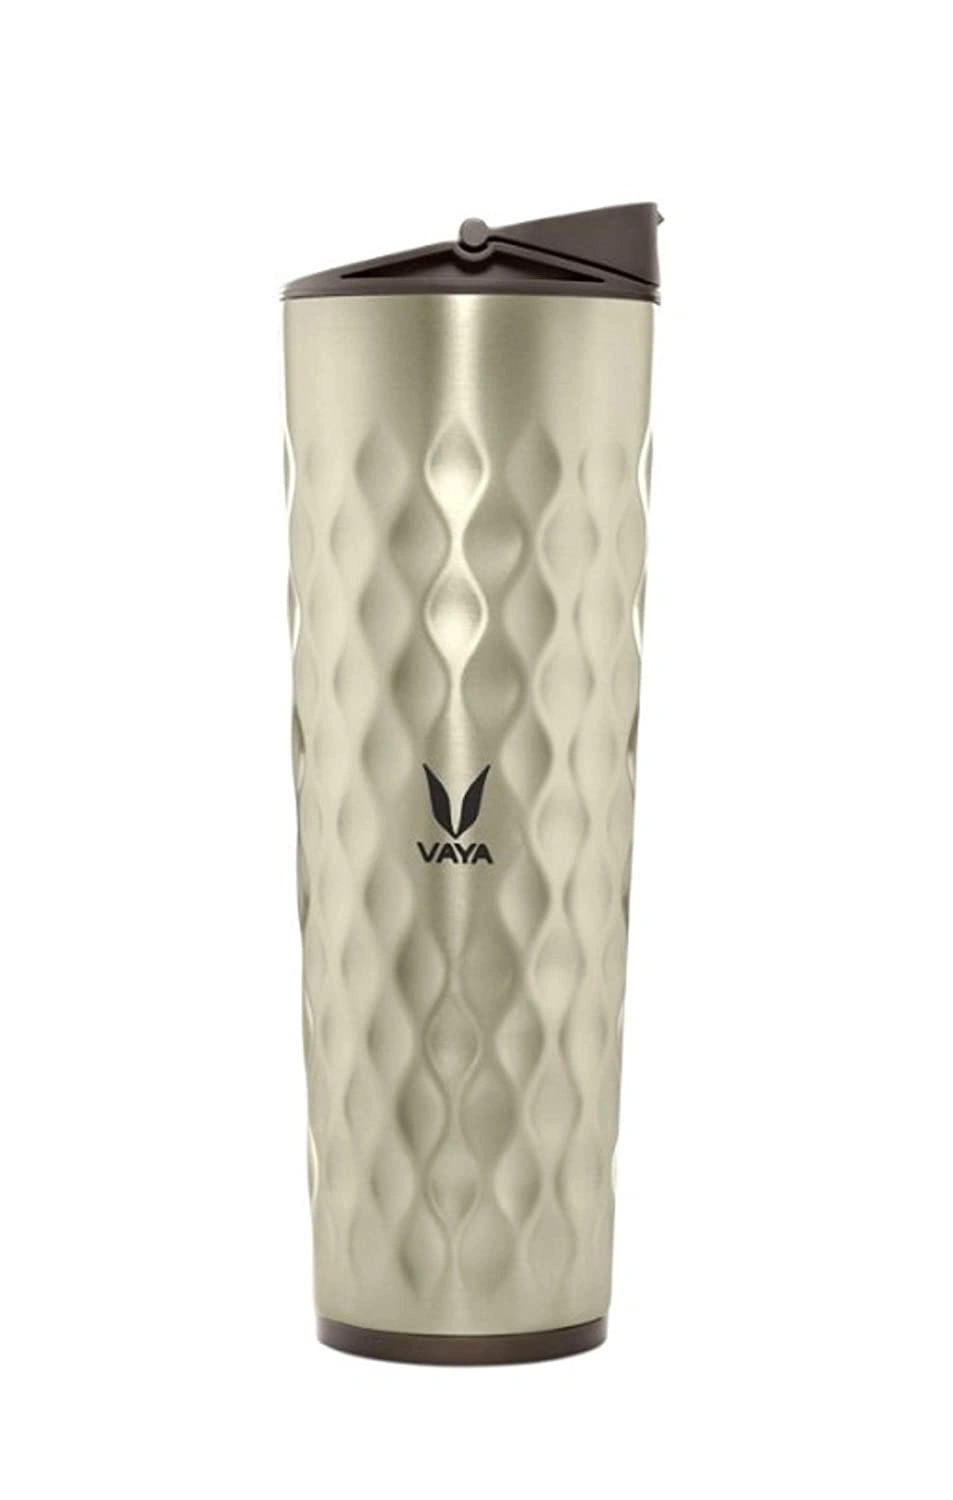 Vaya Drynk 600 ml Vacuum Insulated Stainless Steel Flask, Thermos Sipper Water Bottle (Tumbler+Sipper), Graphite-3